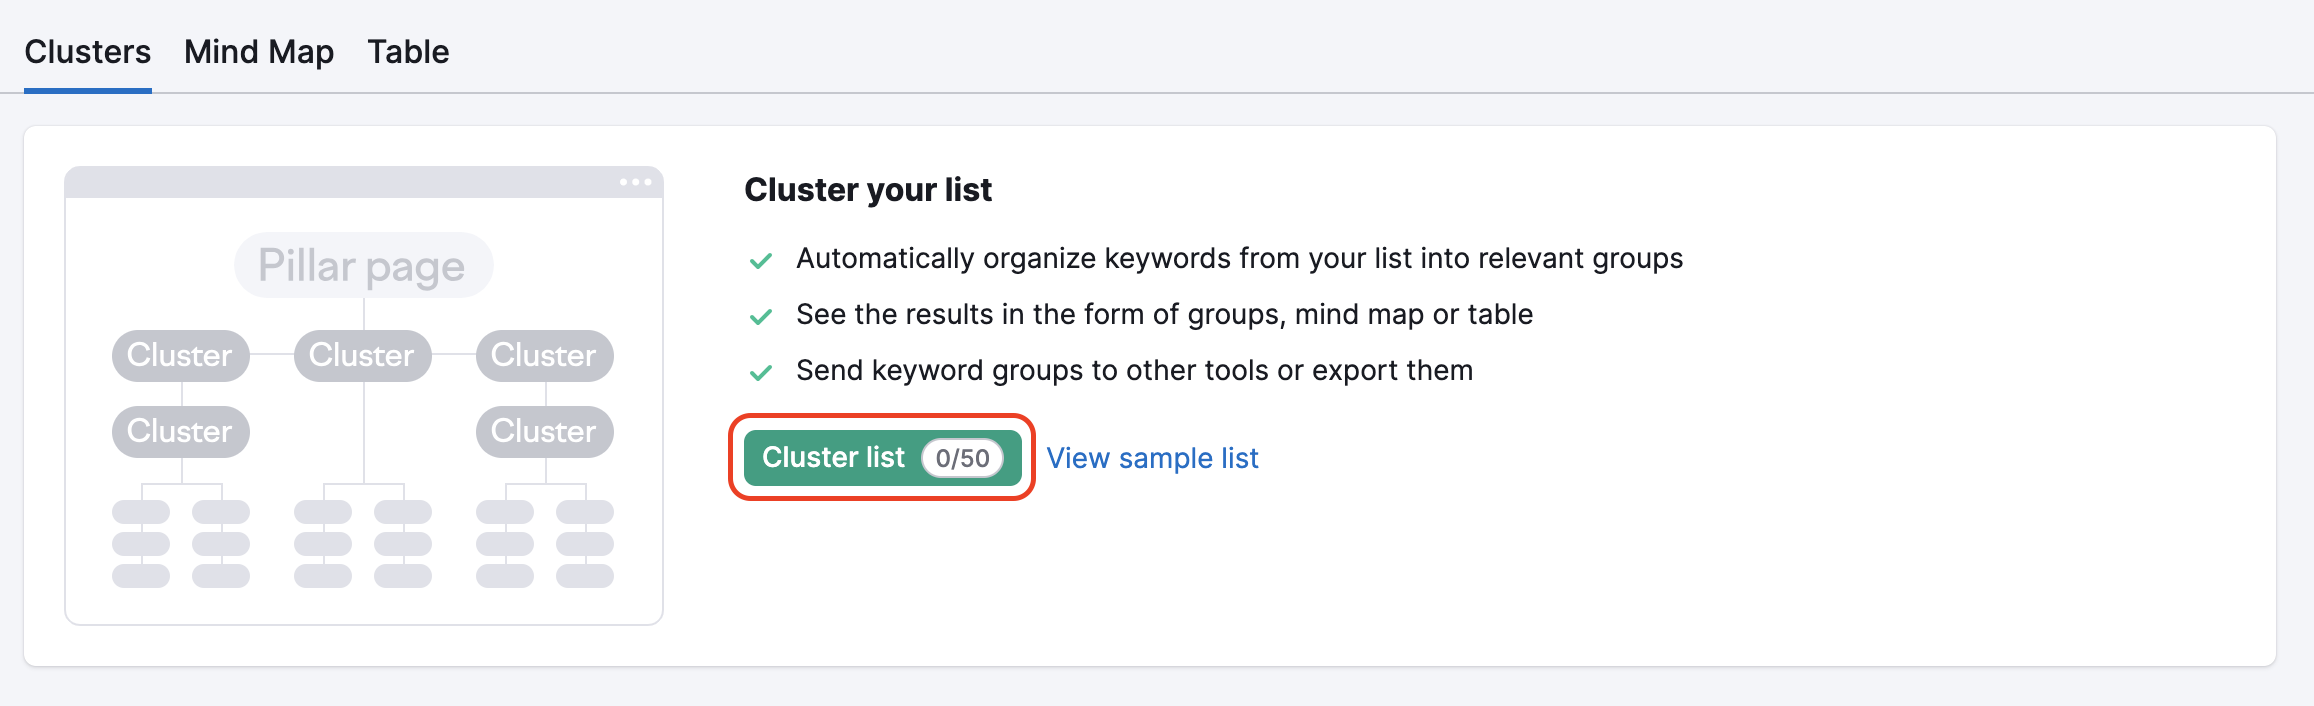 The Cluster list button  in the Clusters tab is highlighted with a red rectangle. 